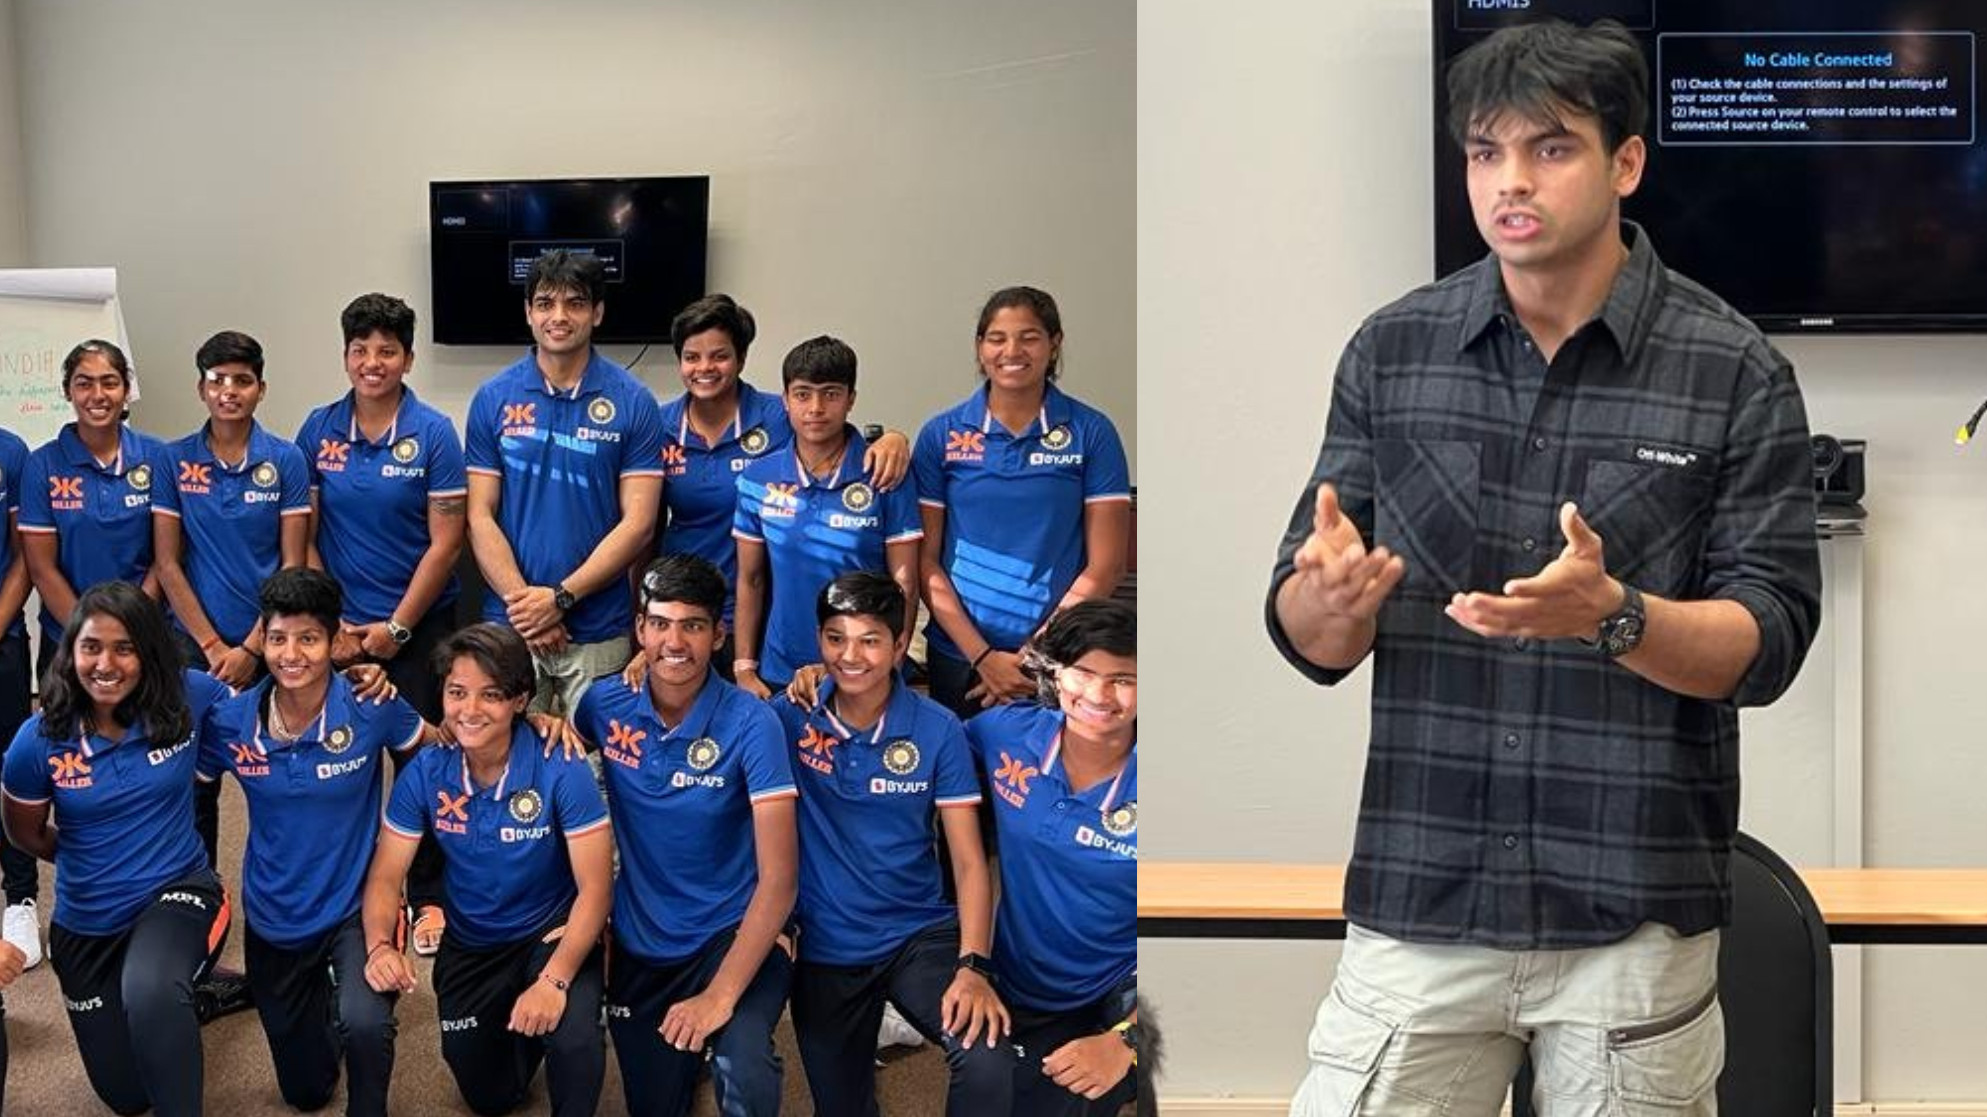 WATCH- Olympic gold-medal winner Neeraj Chopra interacts with India women’s team ahead of U19 T20 World Cup final